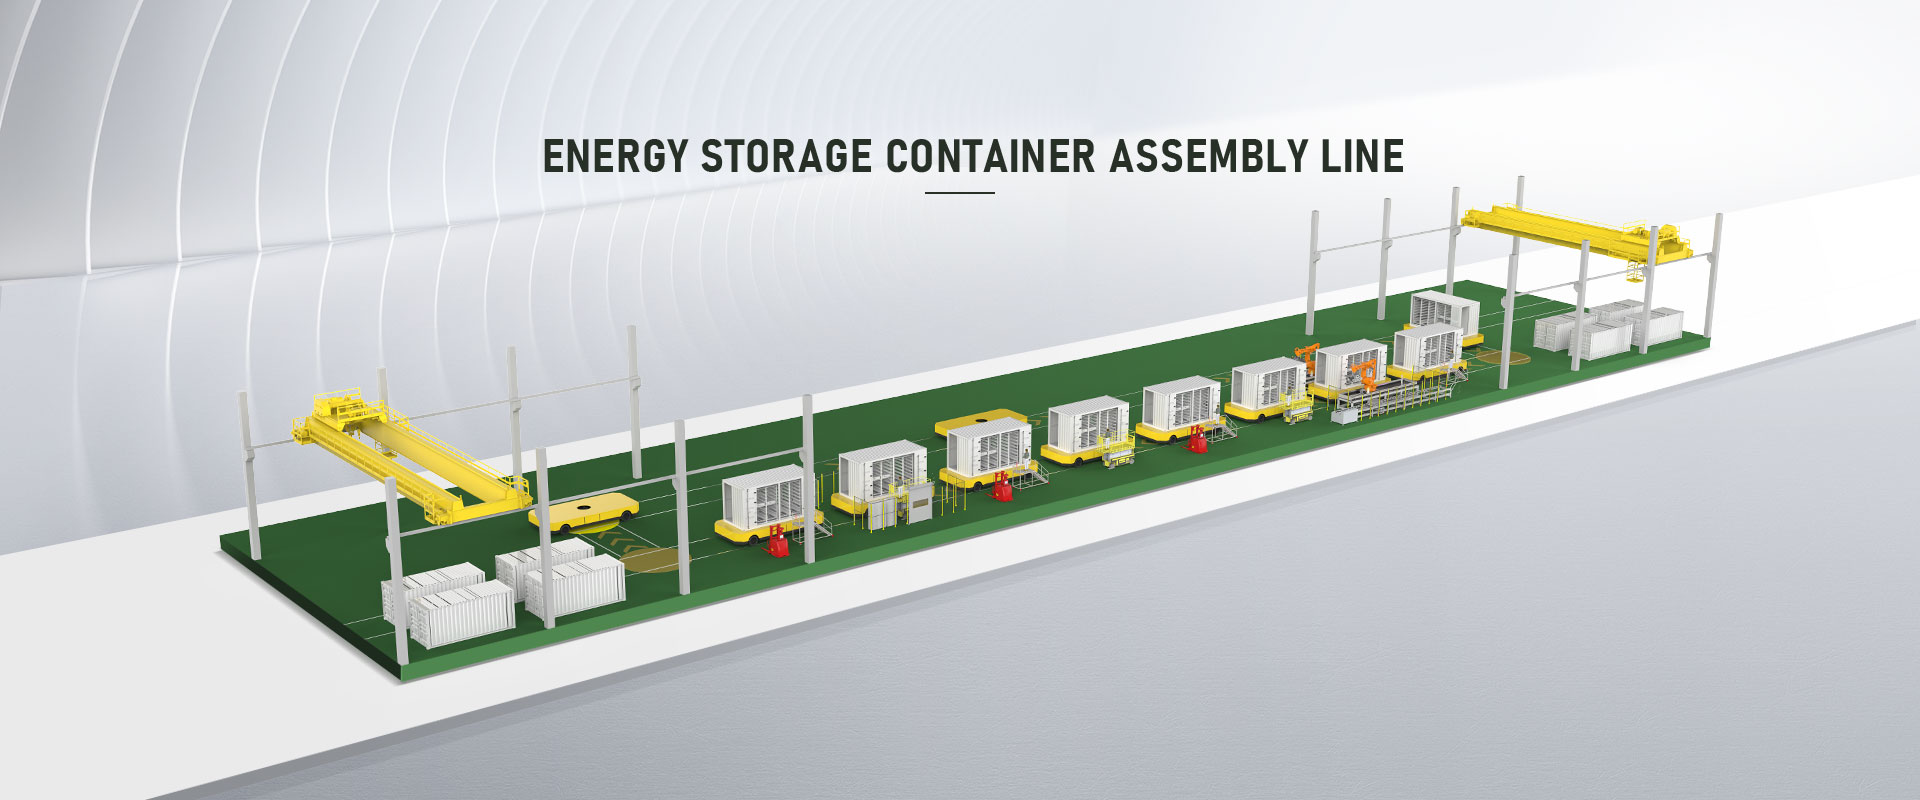 Energy Storage Container Assembly Line